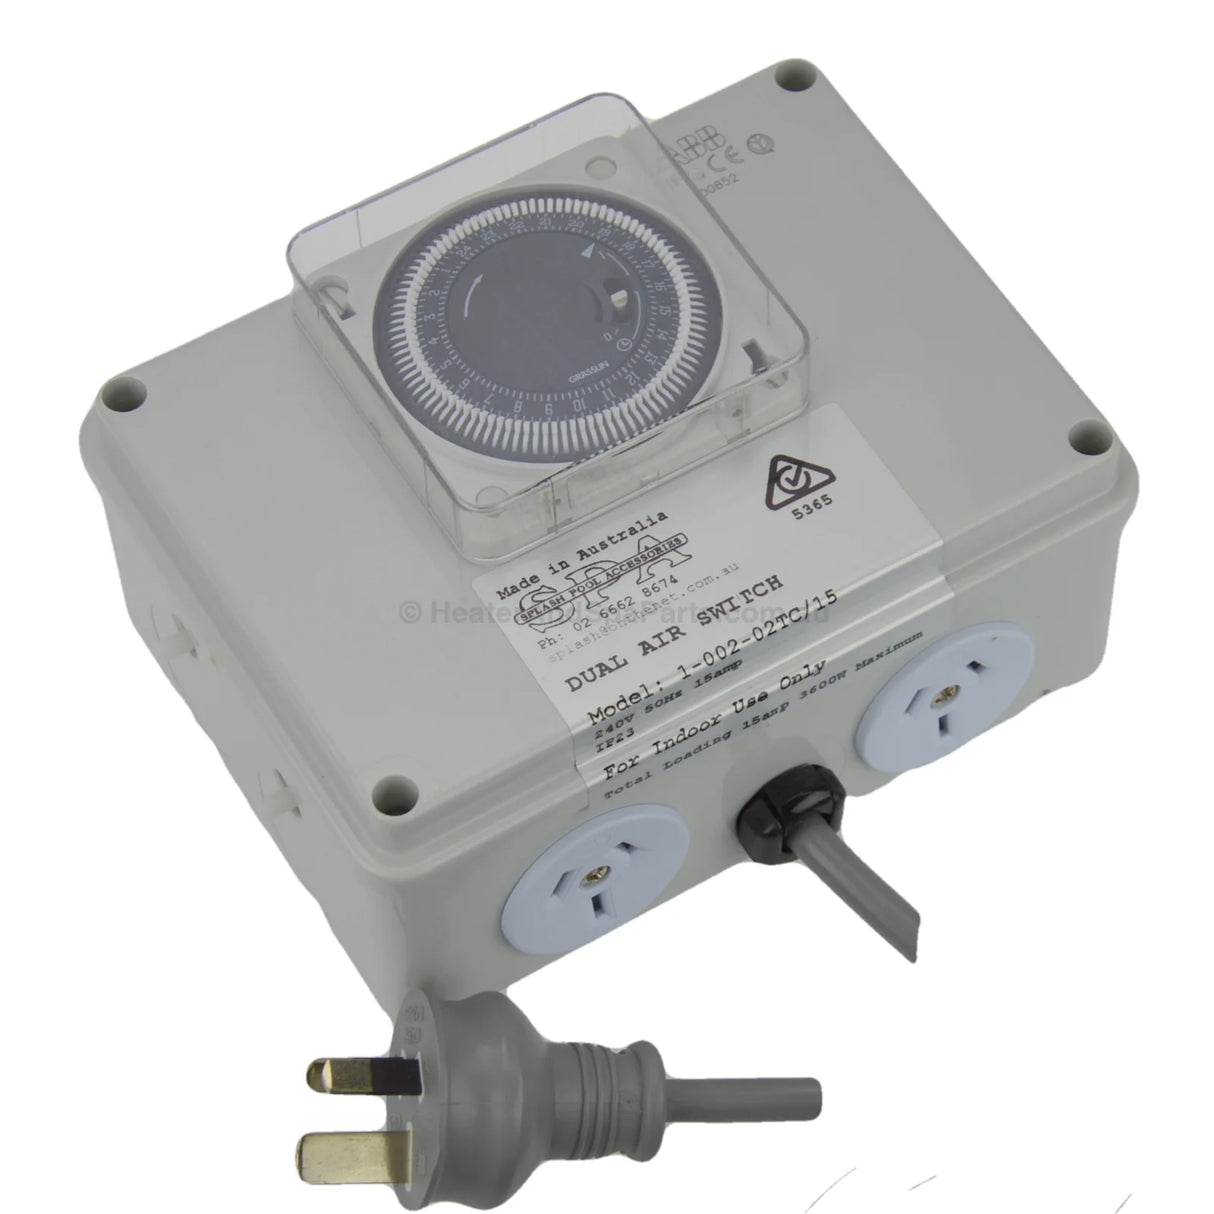 Air Switch - Double with time clock / Dual Air Switch with Timer - Heater and Spa Parts